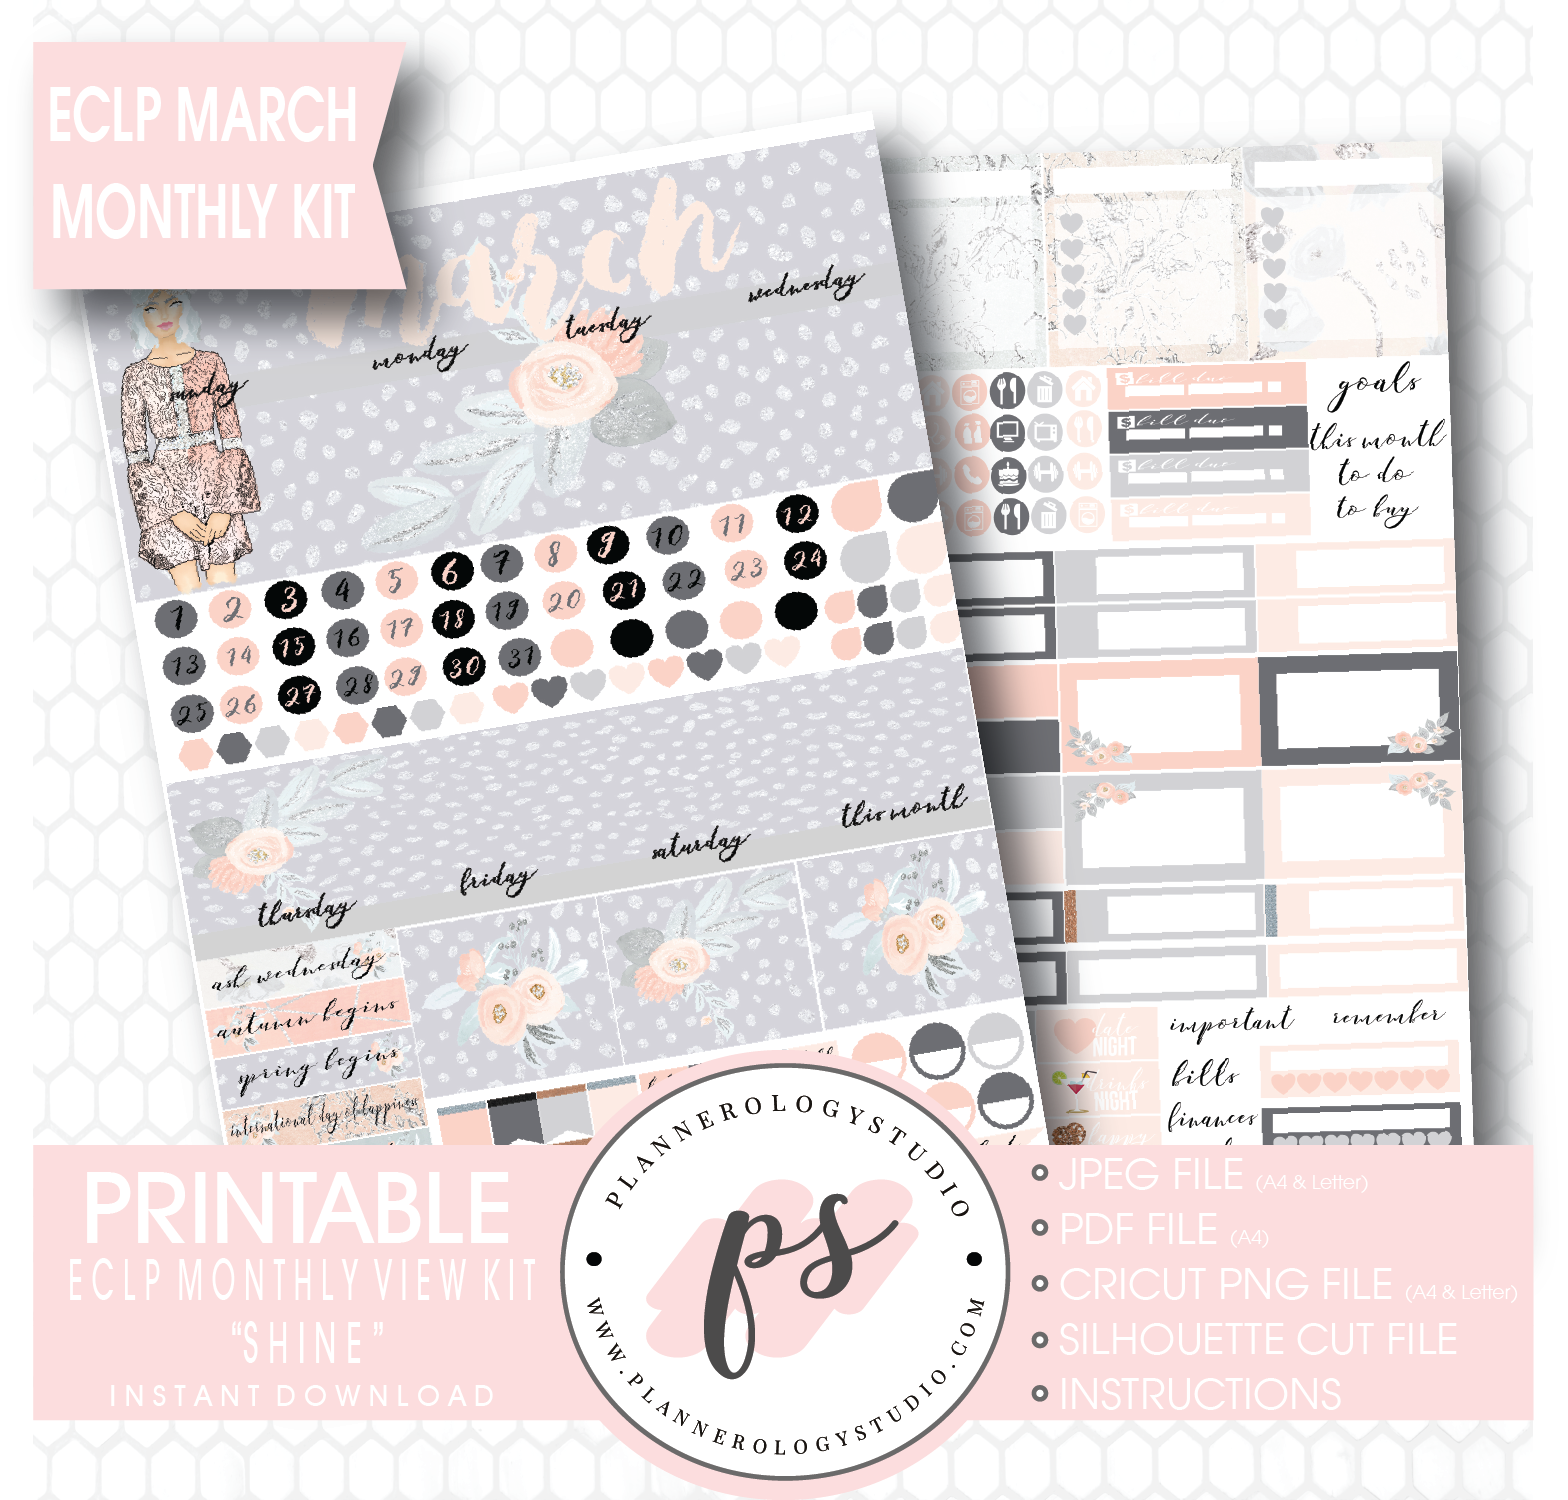 Shine March 2017 Monthly View Kit Printable Planner Stickers (for use with ECLP) - Plannerologystudio